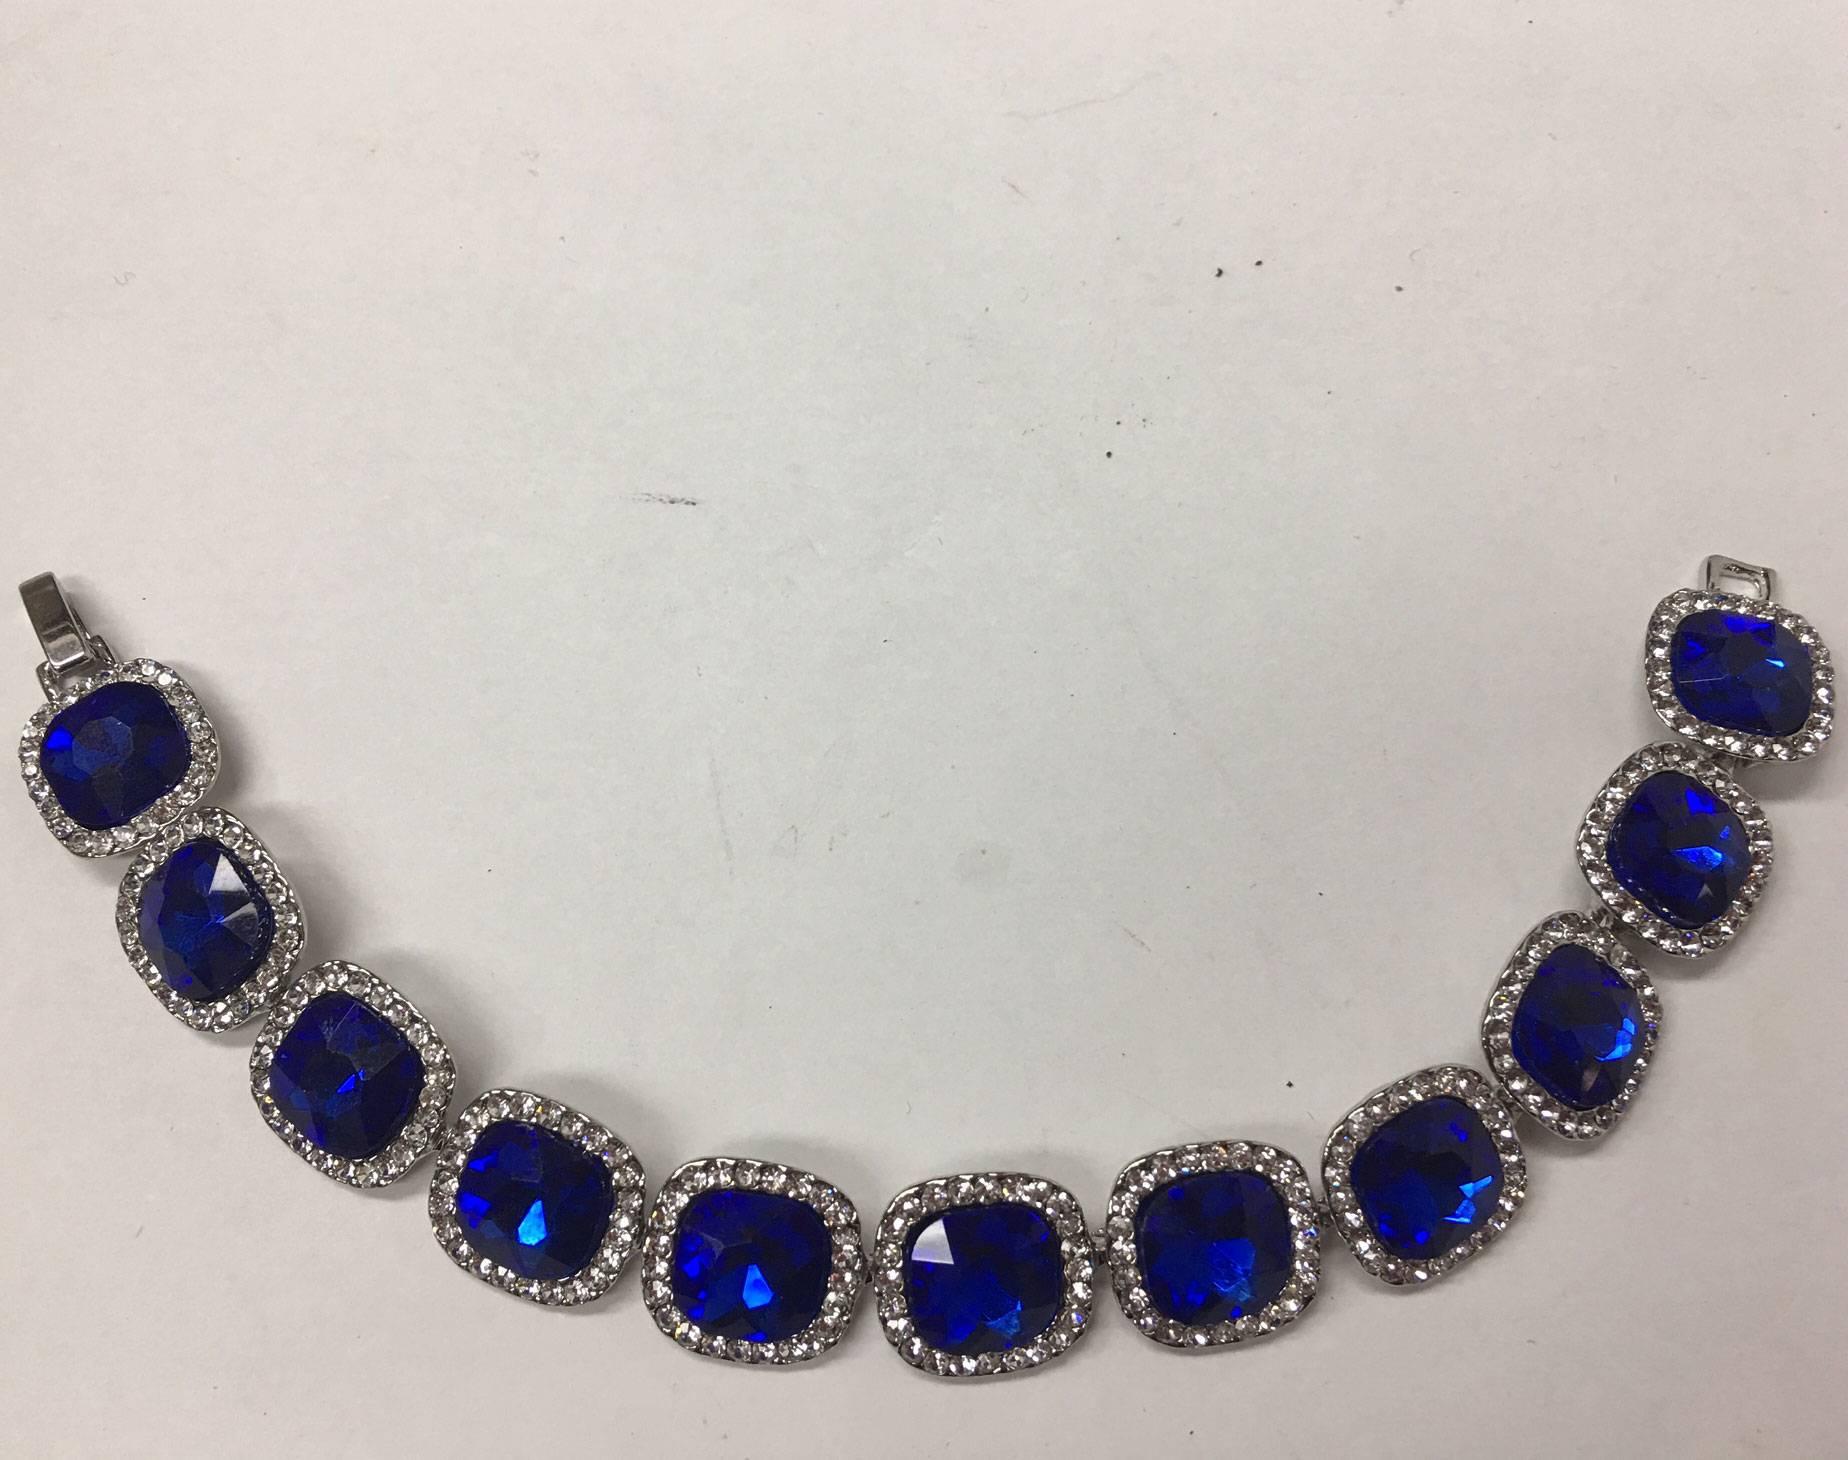 Exceptional Look of Fine Jewelry Sparkling Blue Sapphire Glass and Crystal Heavy Runway Bracelet; Silver tone metal; fold over Clasp. Approx. 7.5 Inches long; A perfect complement to every wardrobe…Illuminating your Look with a touch of Class!
